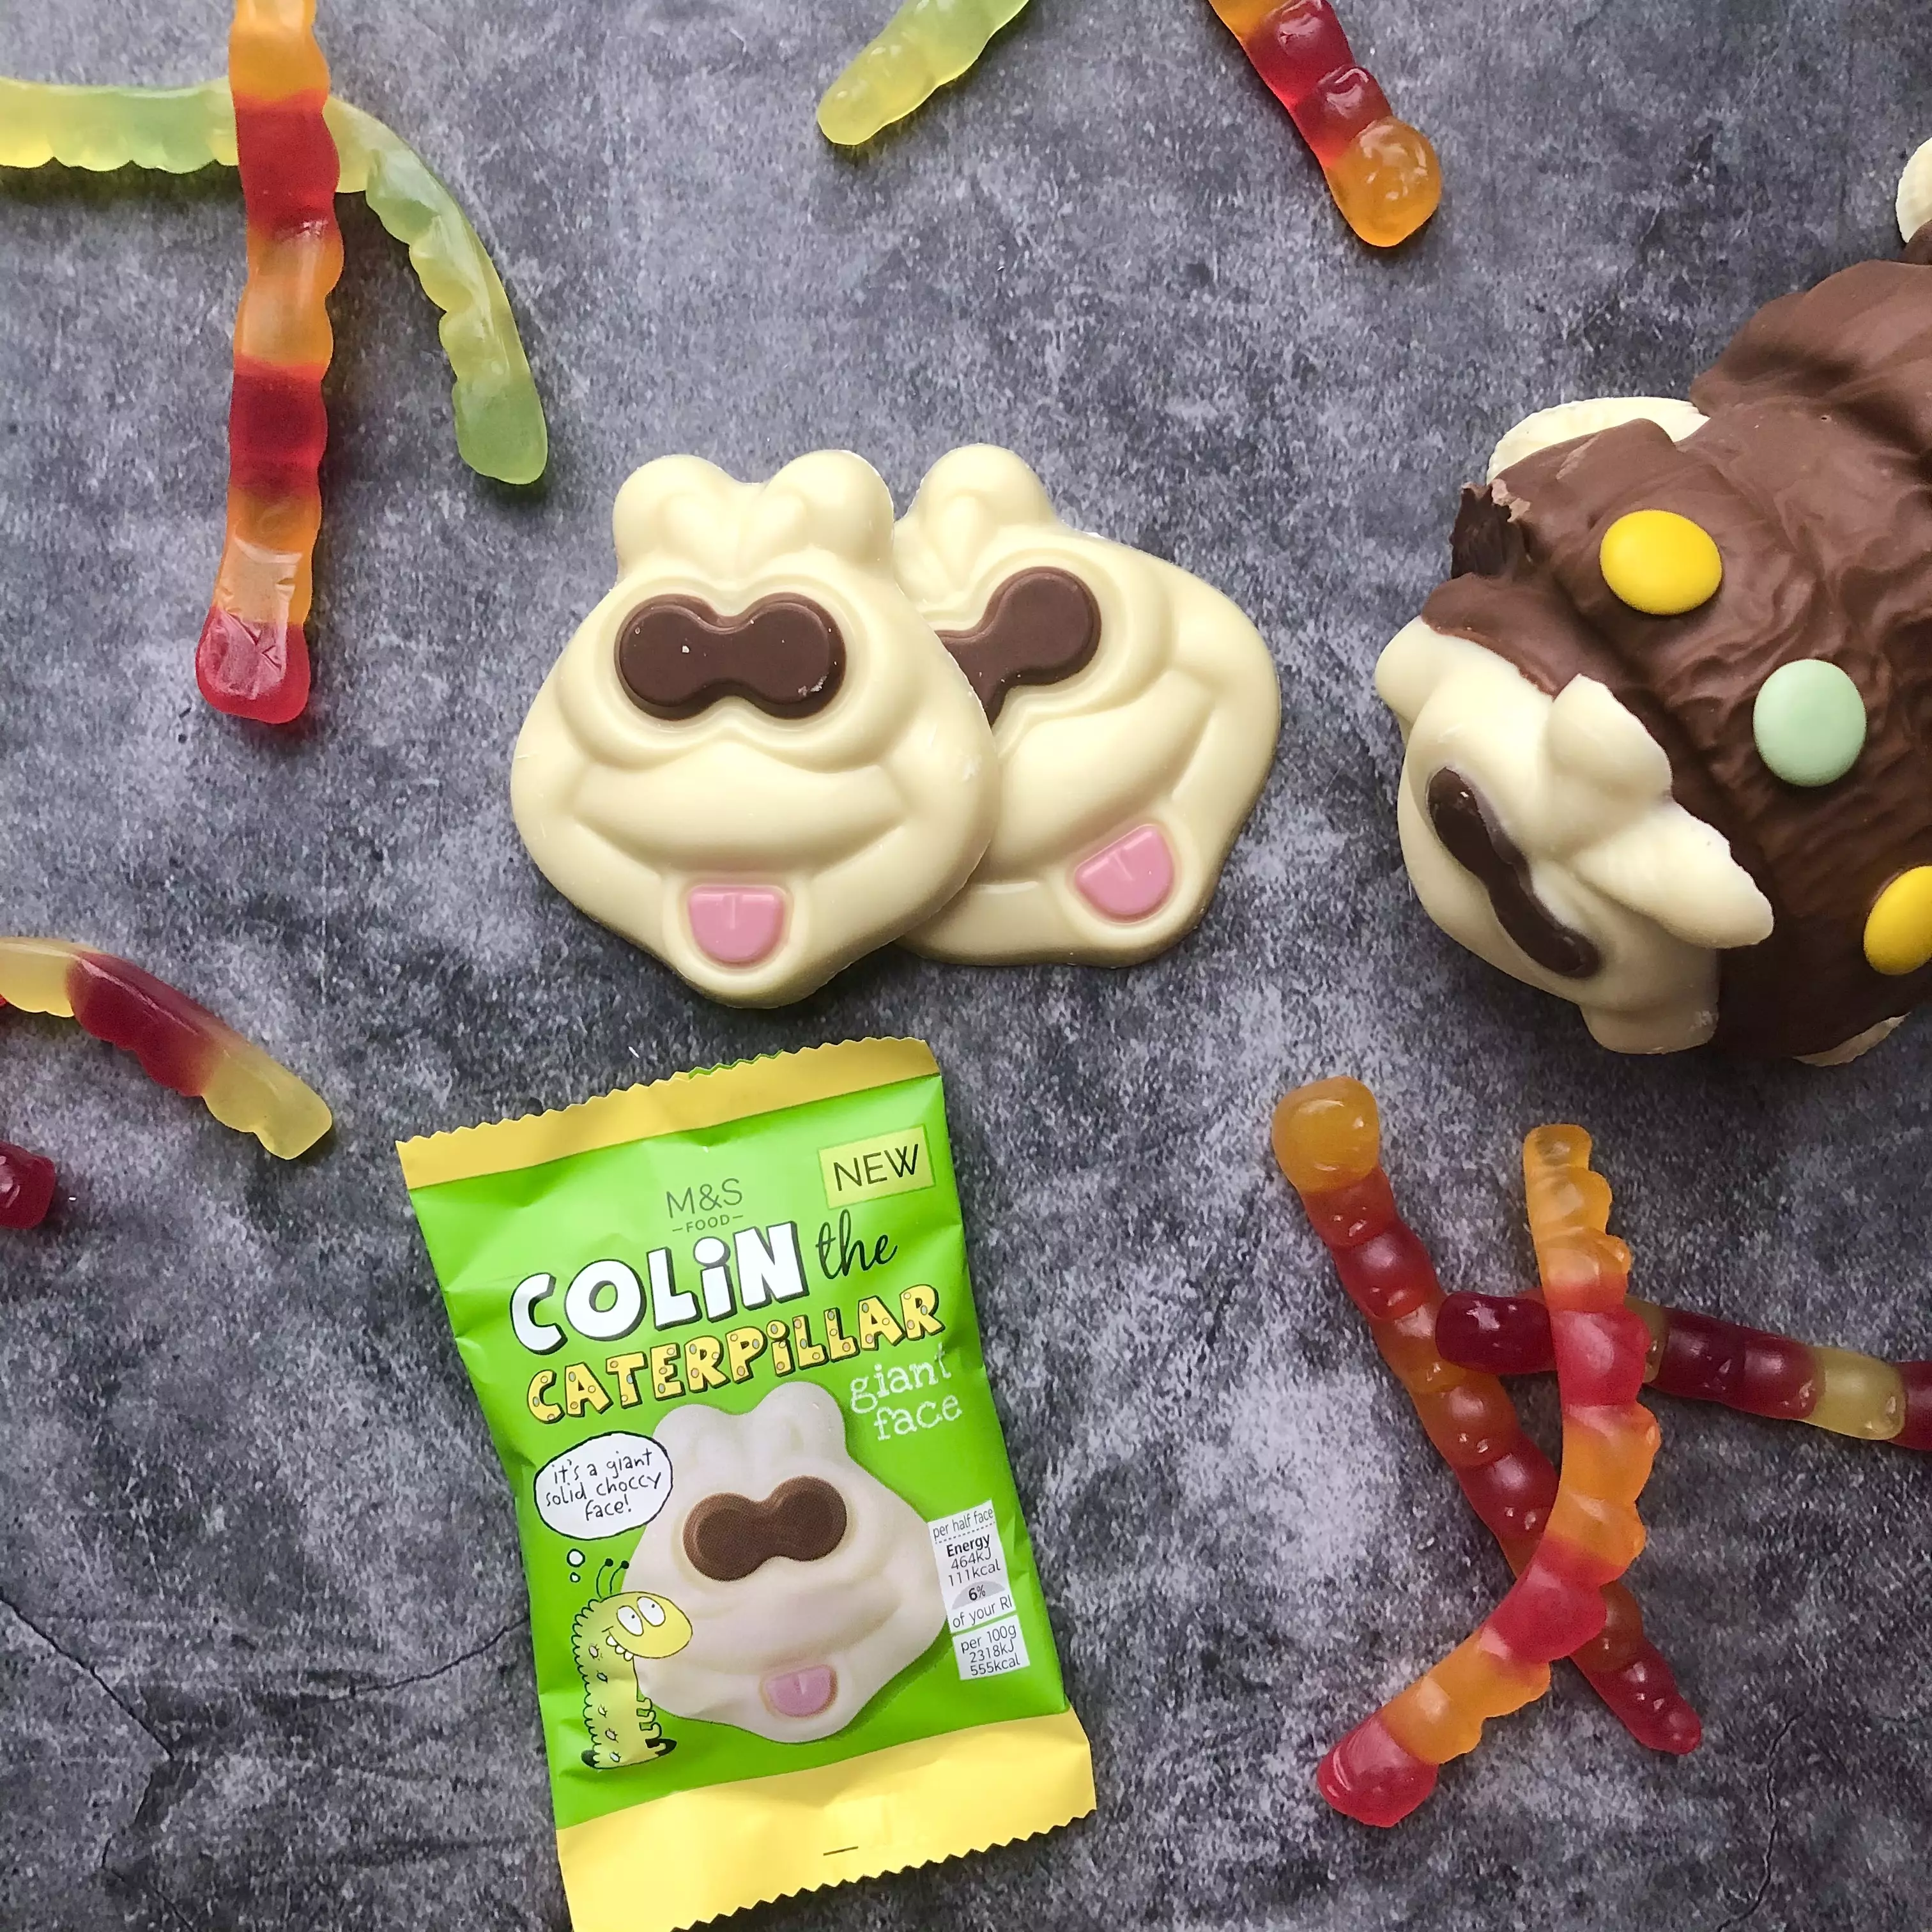 You can now grab some Colin on the go (